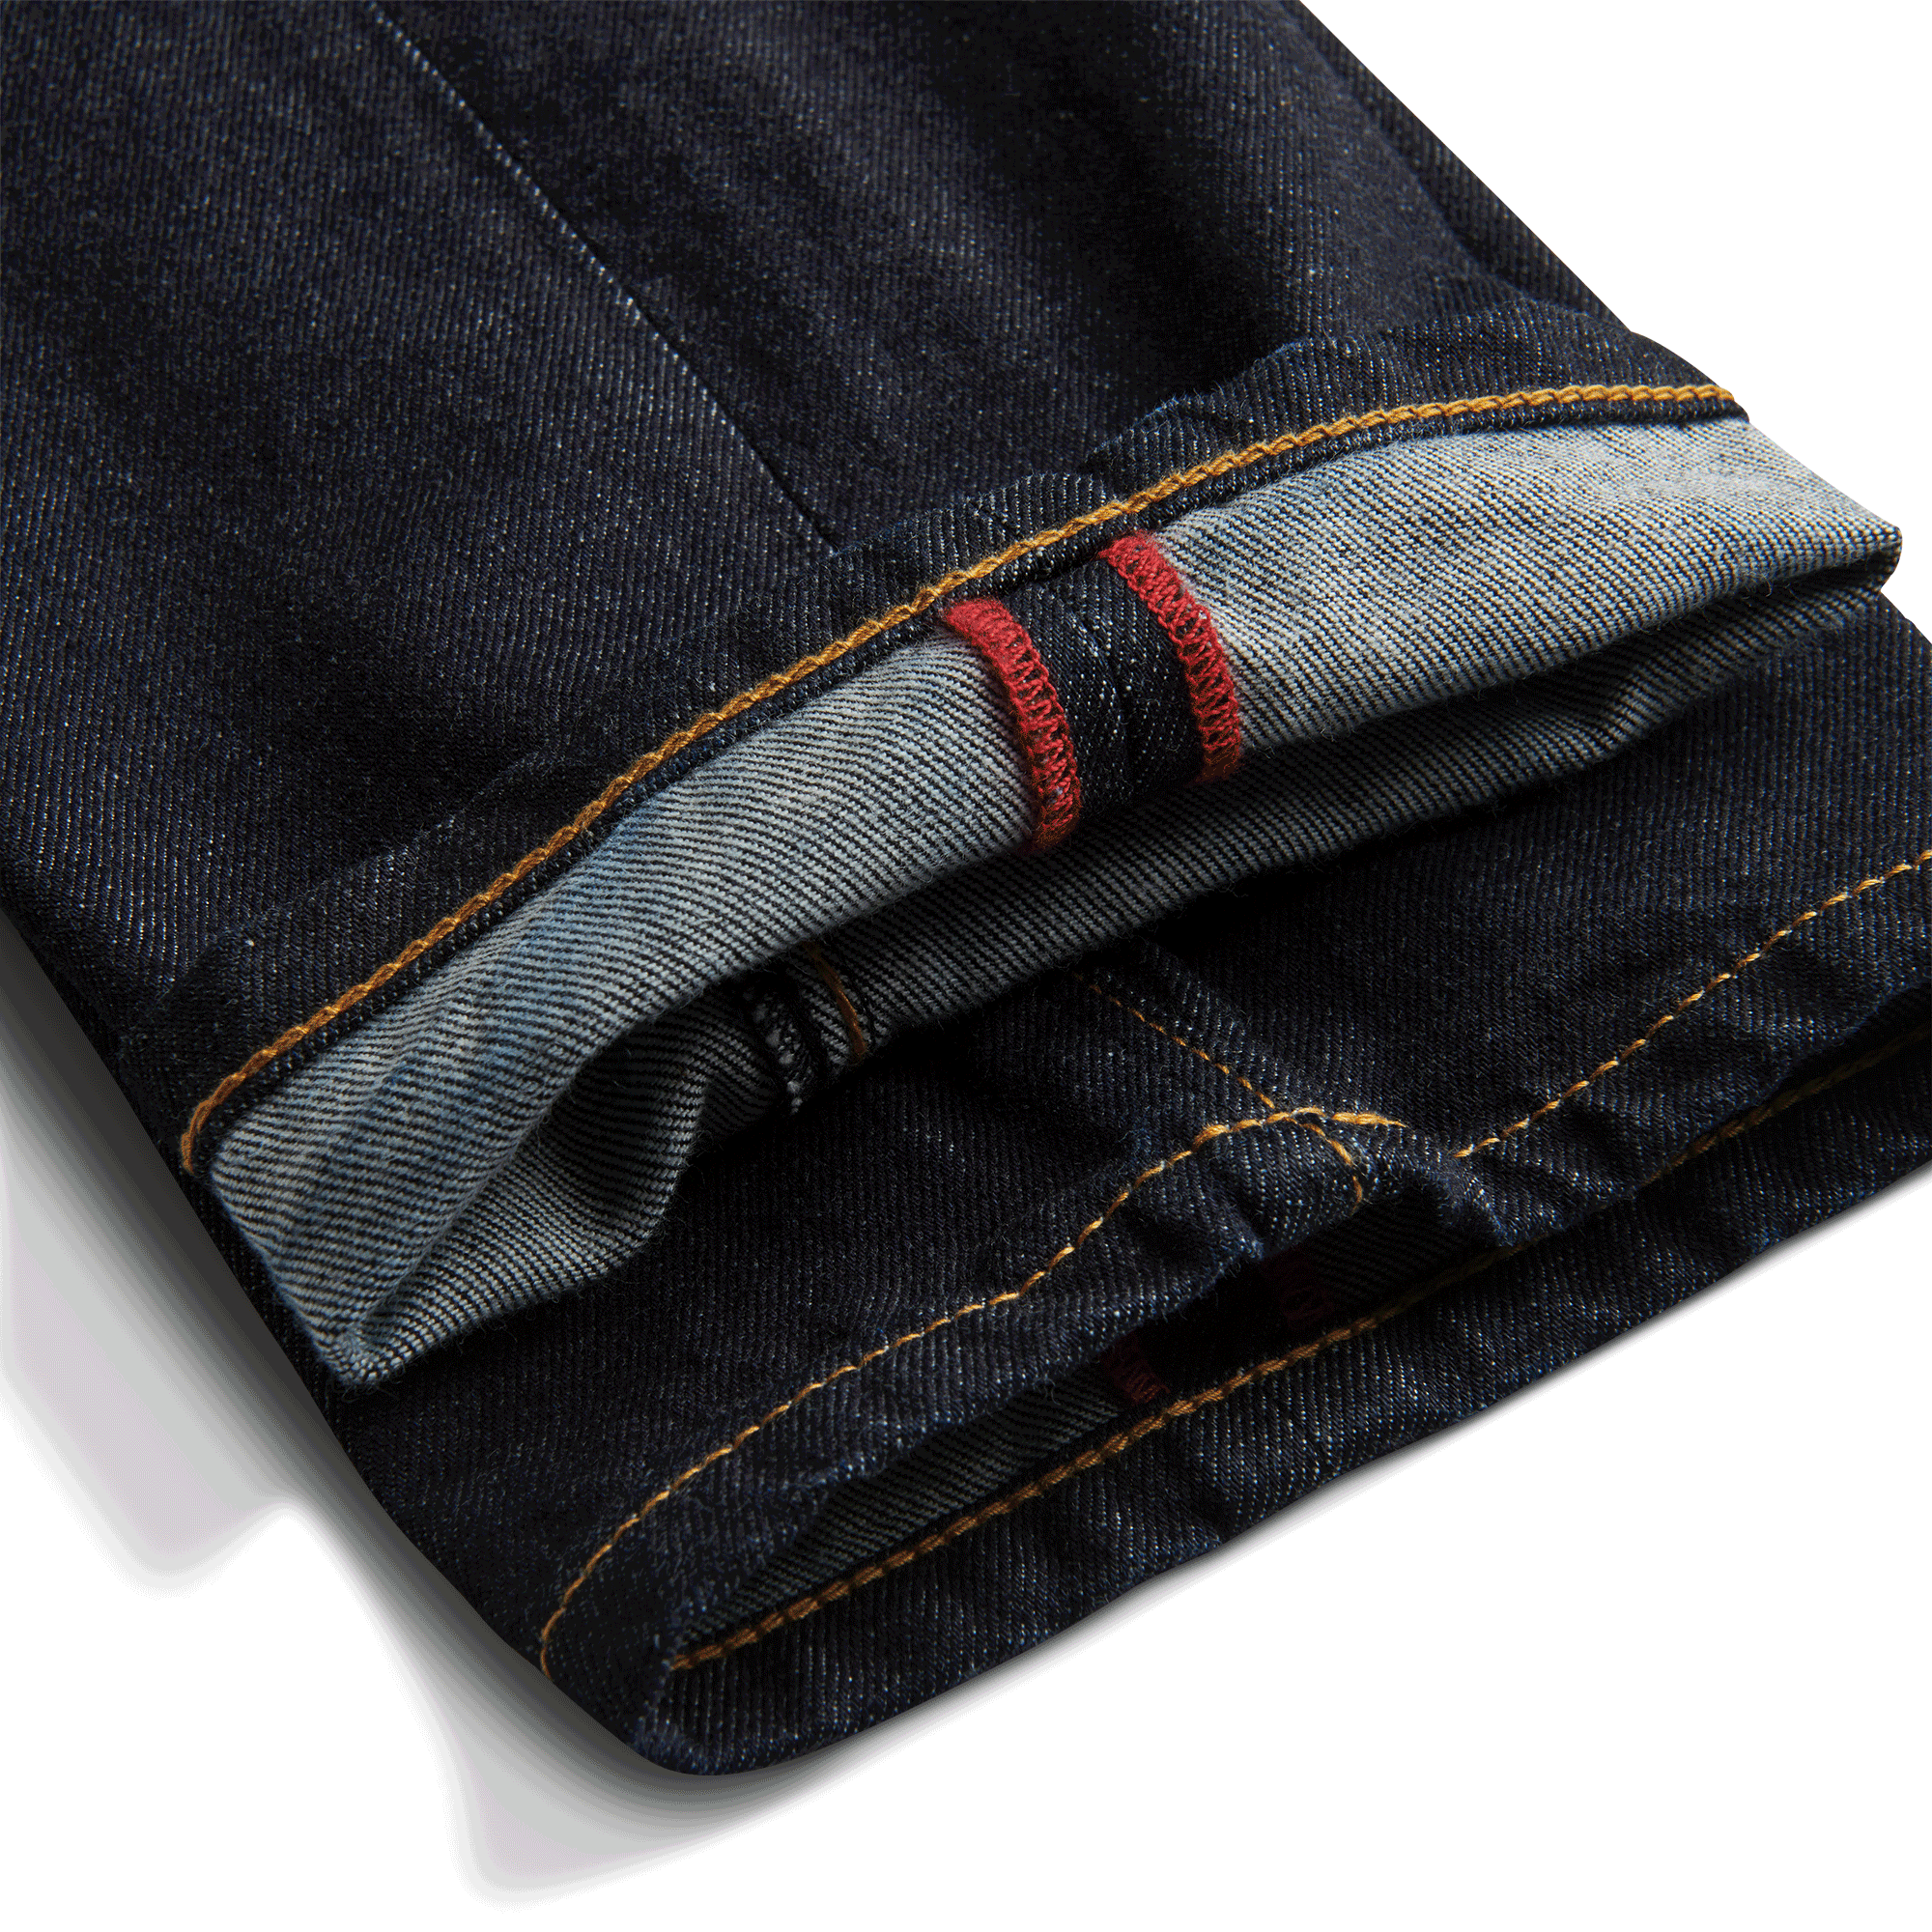 A Way to Lengthen the Zipper on Denim? : r/sewing